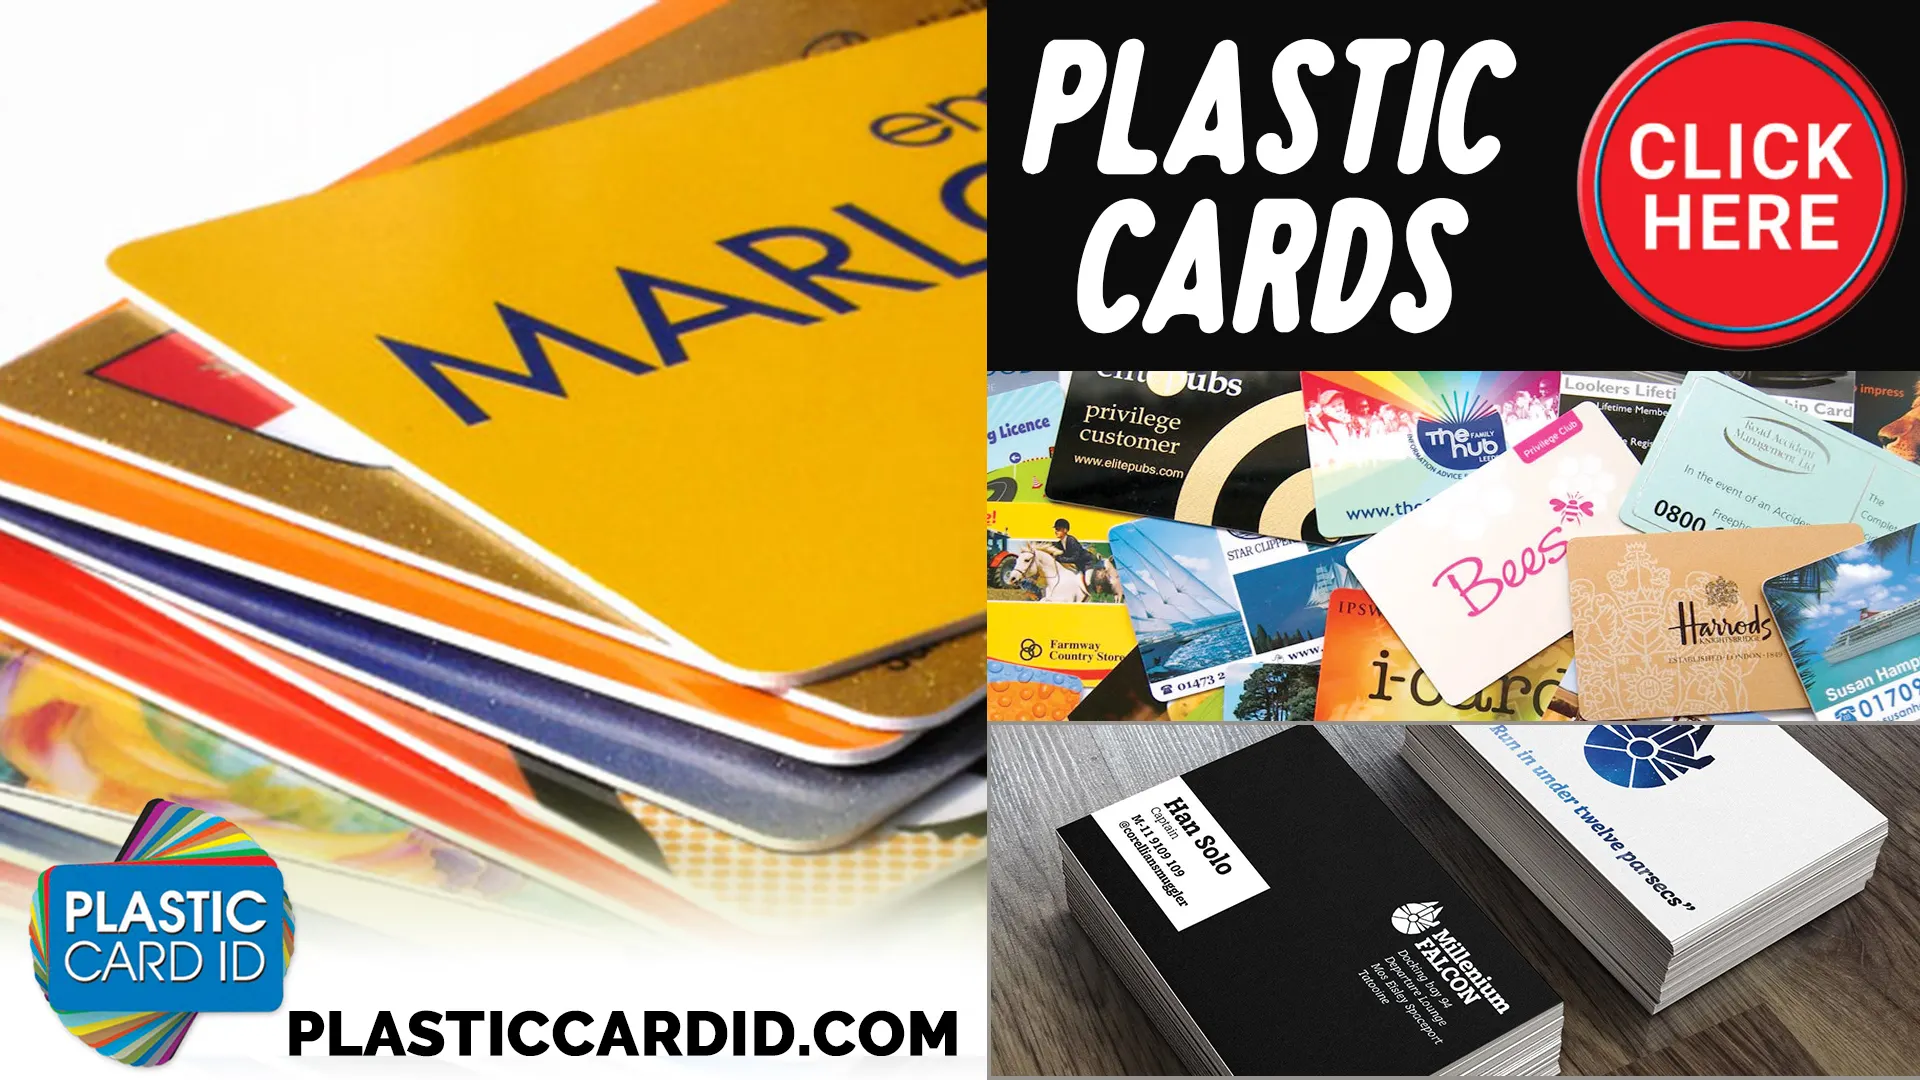 Meeting the Demand for Distinctive Plastic Cards